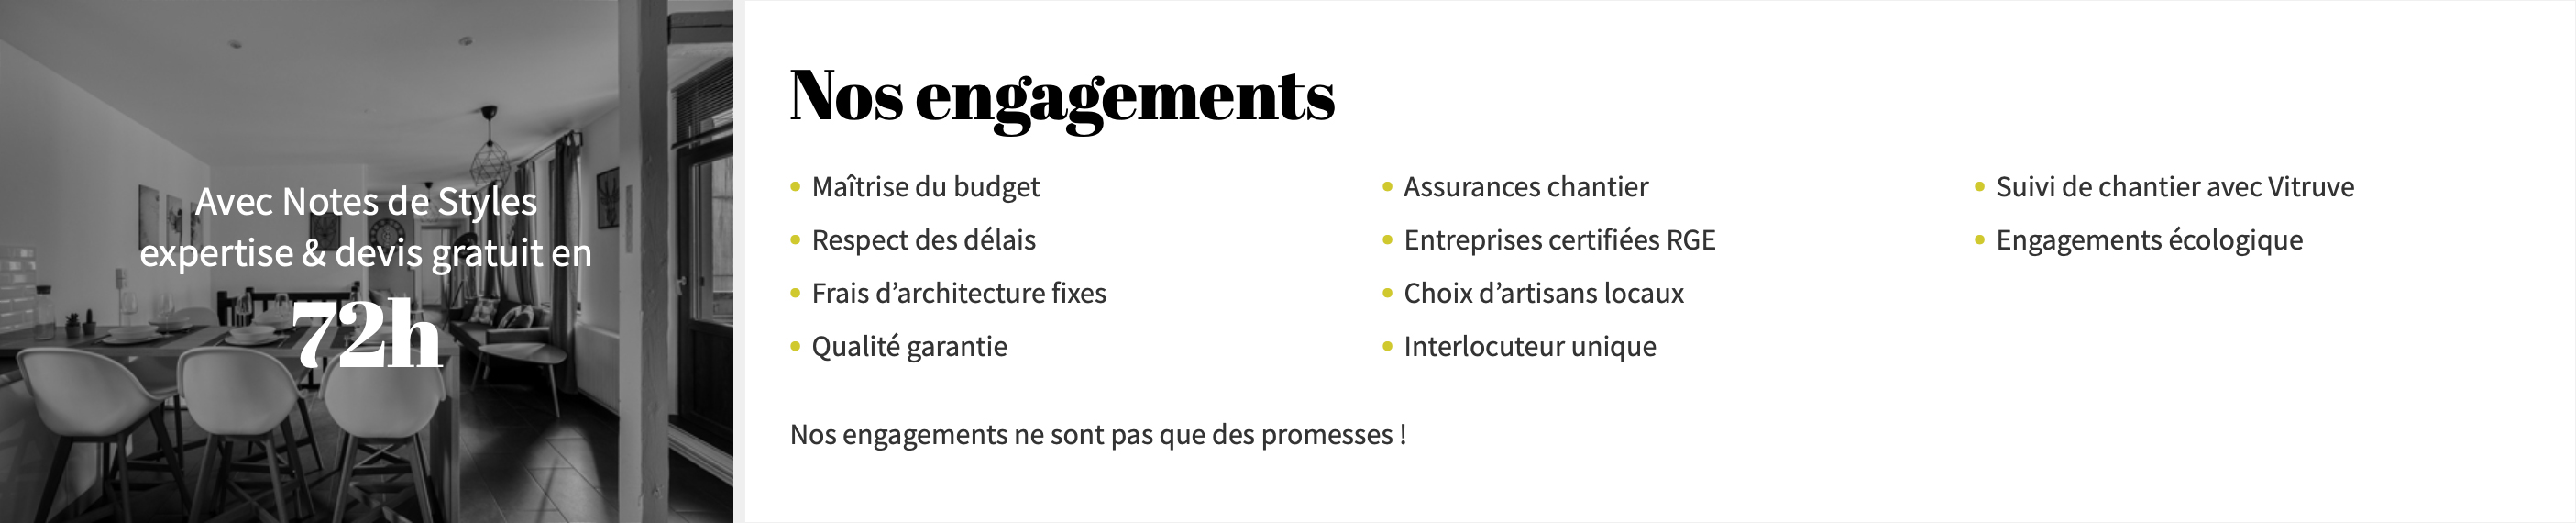 Notes de Styles Annecy - Nos engagements